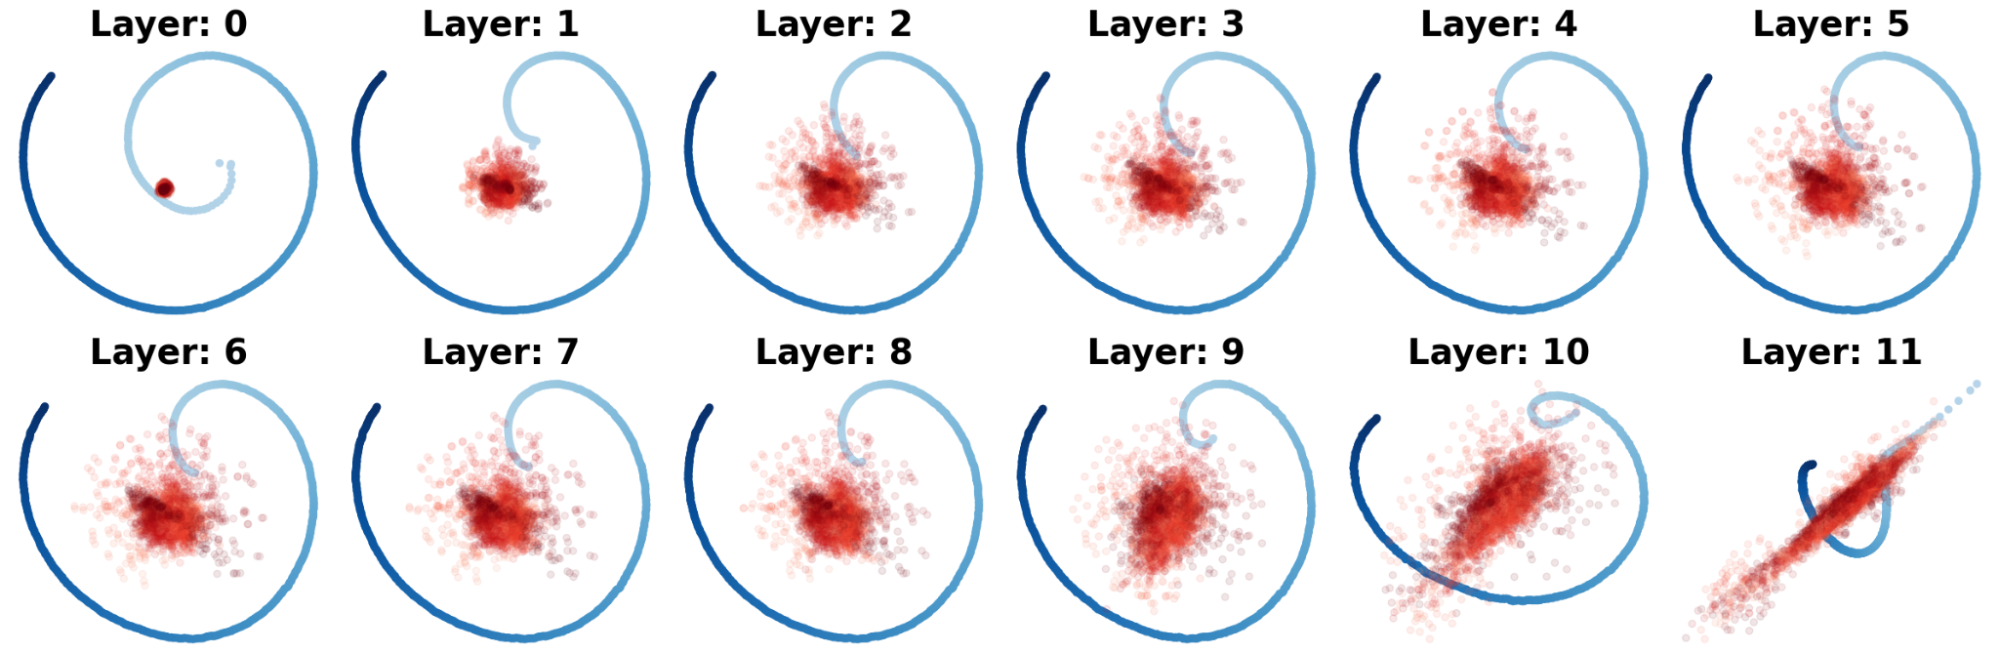 PCA visualization of positional mean vectors in each layer